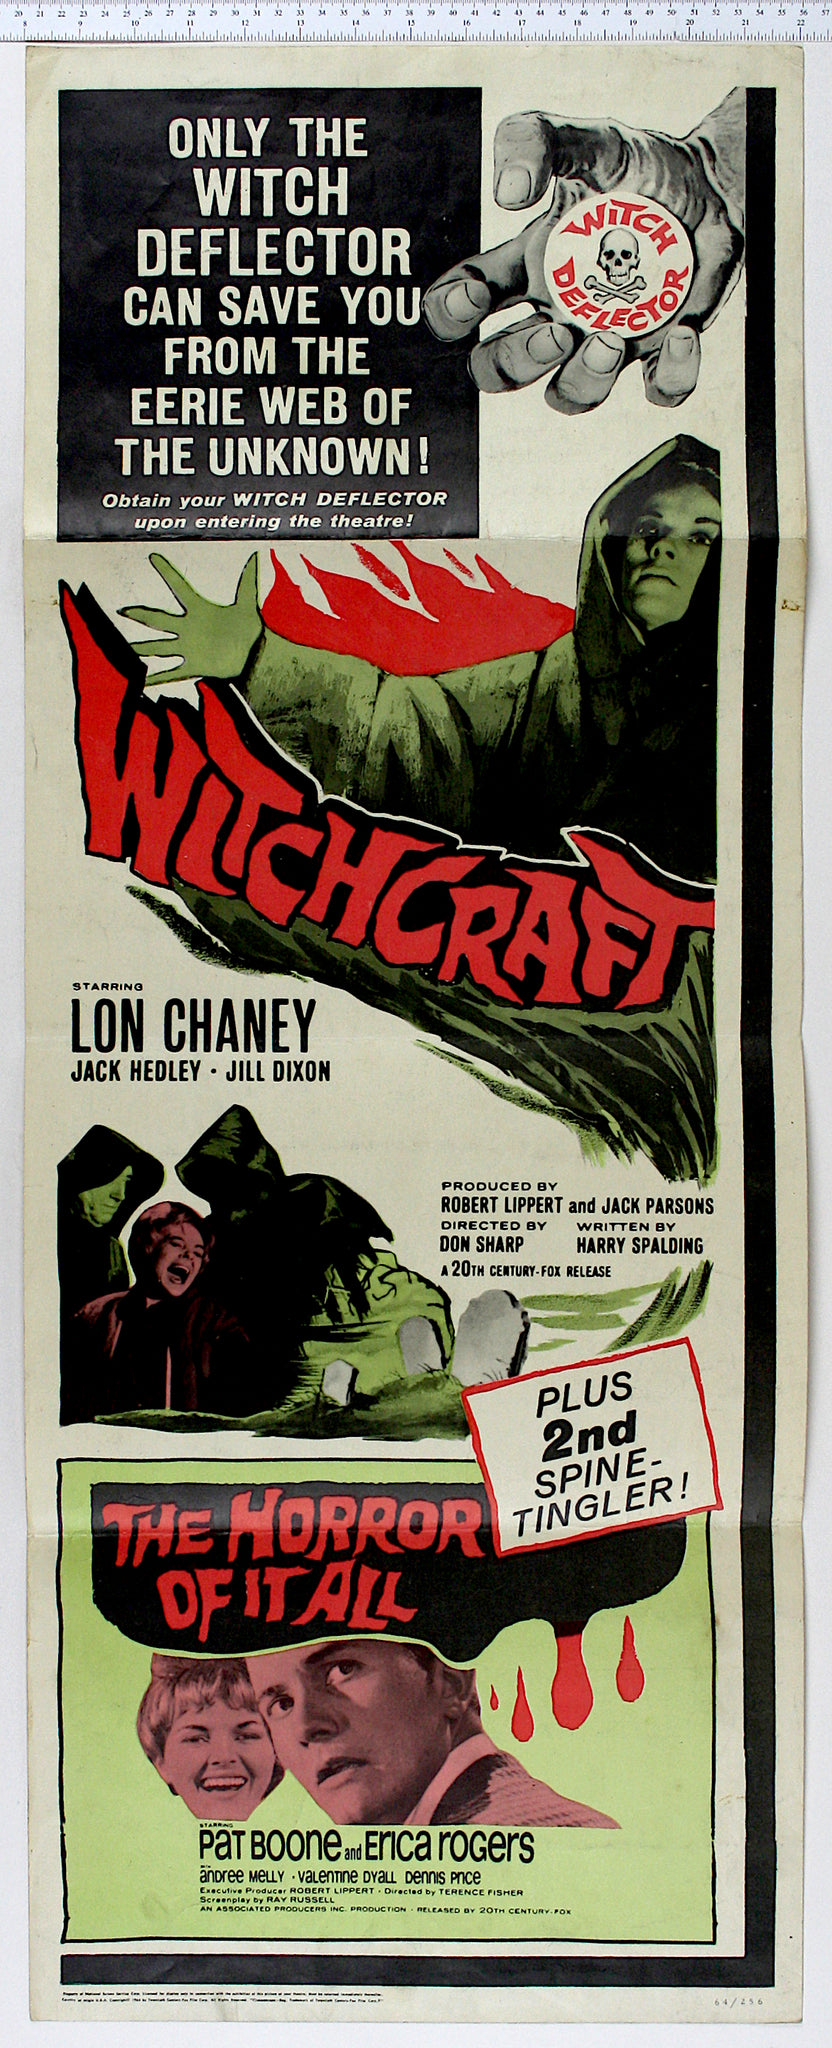 At top right, a hand holds the 'witch deflector', a gimmick button given to patrons. Below is a hooded woman holding her arms out, graphic flames behind. Below to the left, a screaming woman is held by two other hooded figures, with a graveyard in grey and green at the side. Below this, under a box stating 'plus 2nd spine-tingler' The Horror of it All has text in red on black, and at bottom, stills of Boone and Rogers.